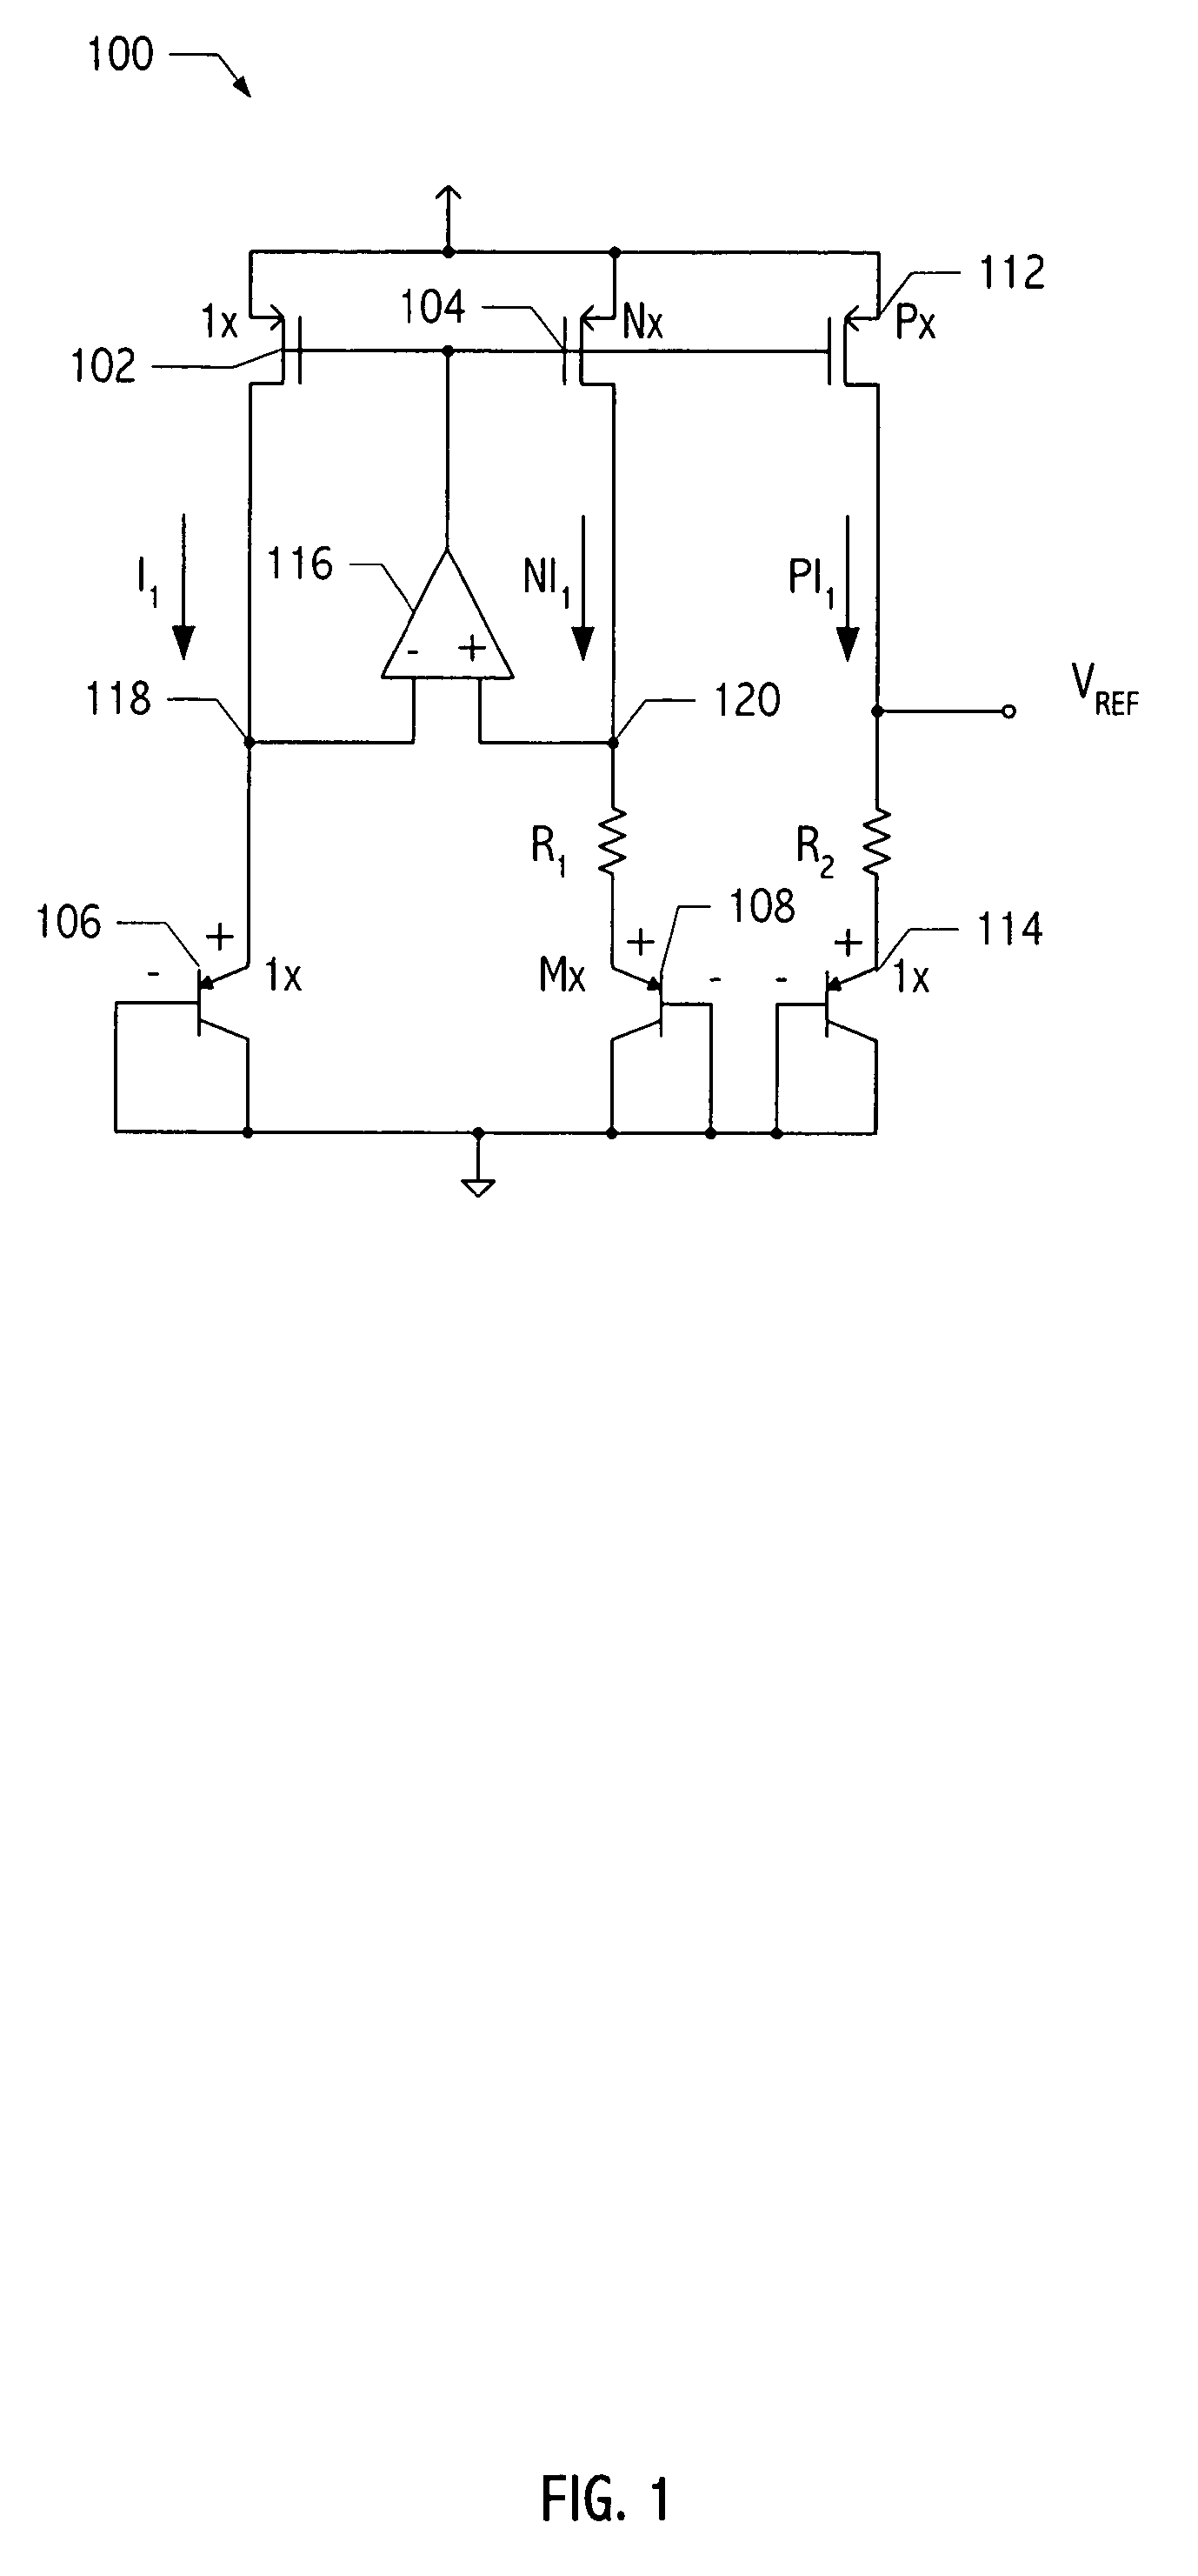 Voltage reference generator circuit subtracting CTAT current from PTAT current